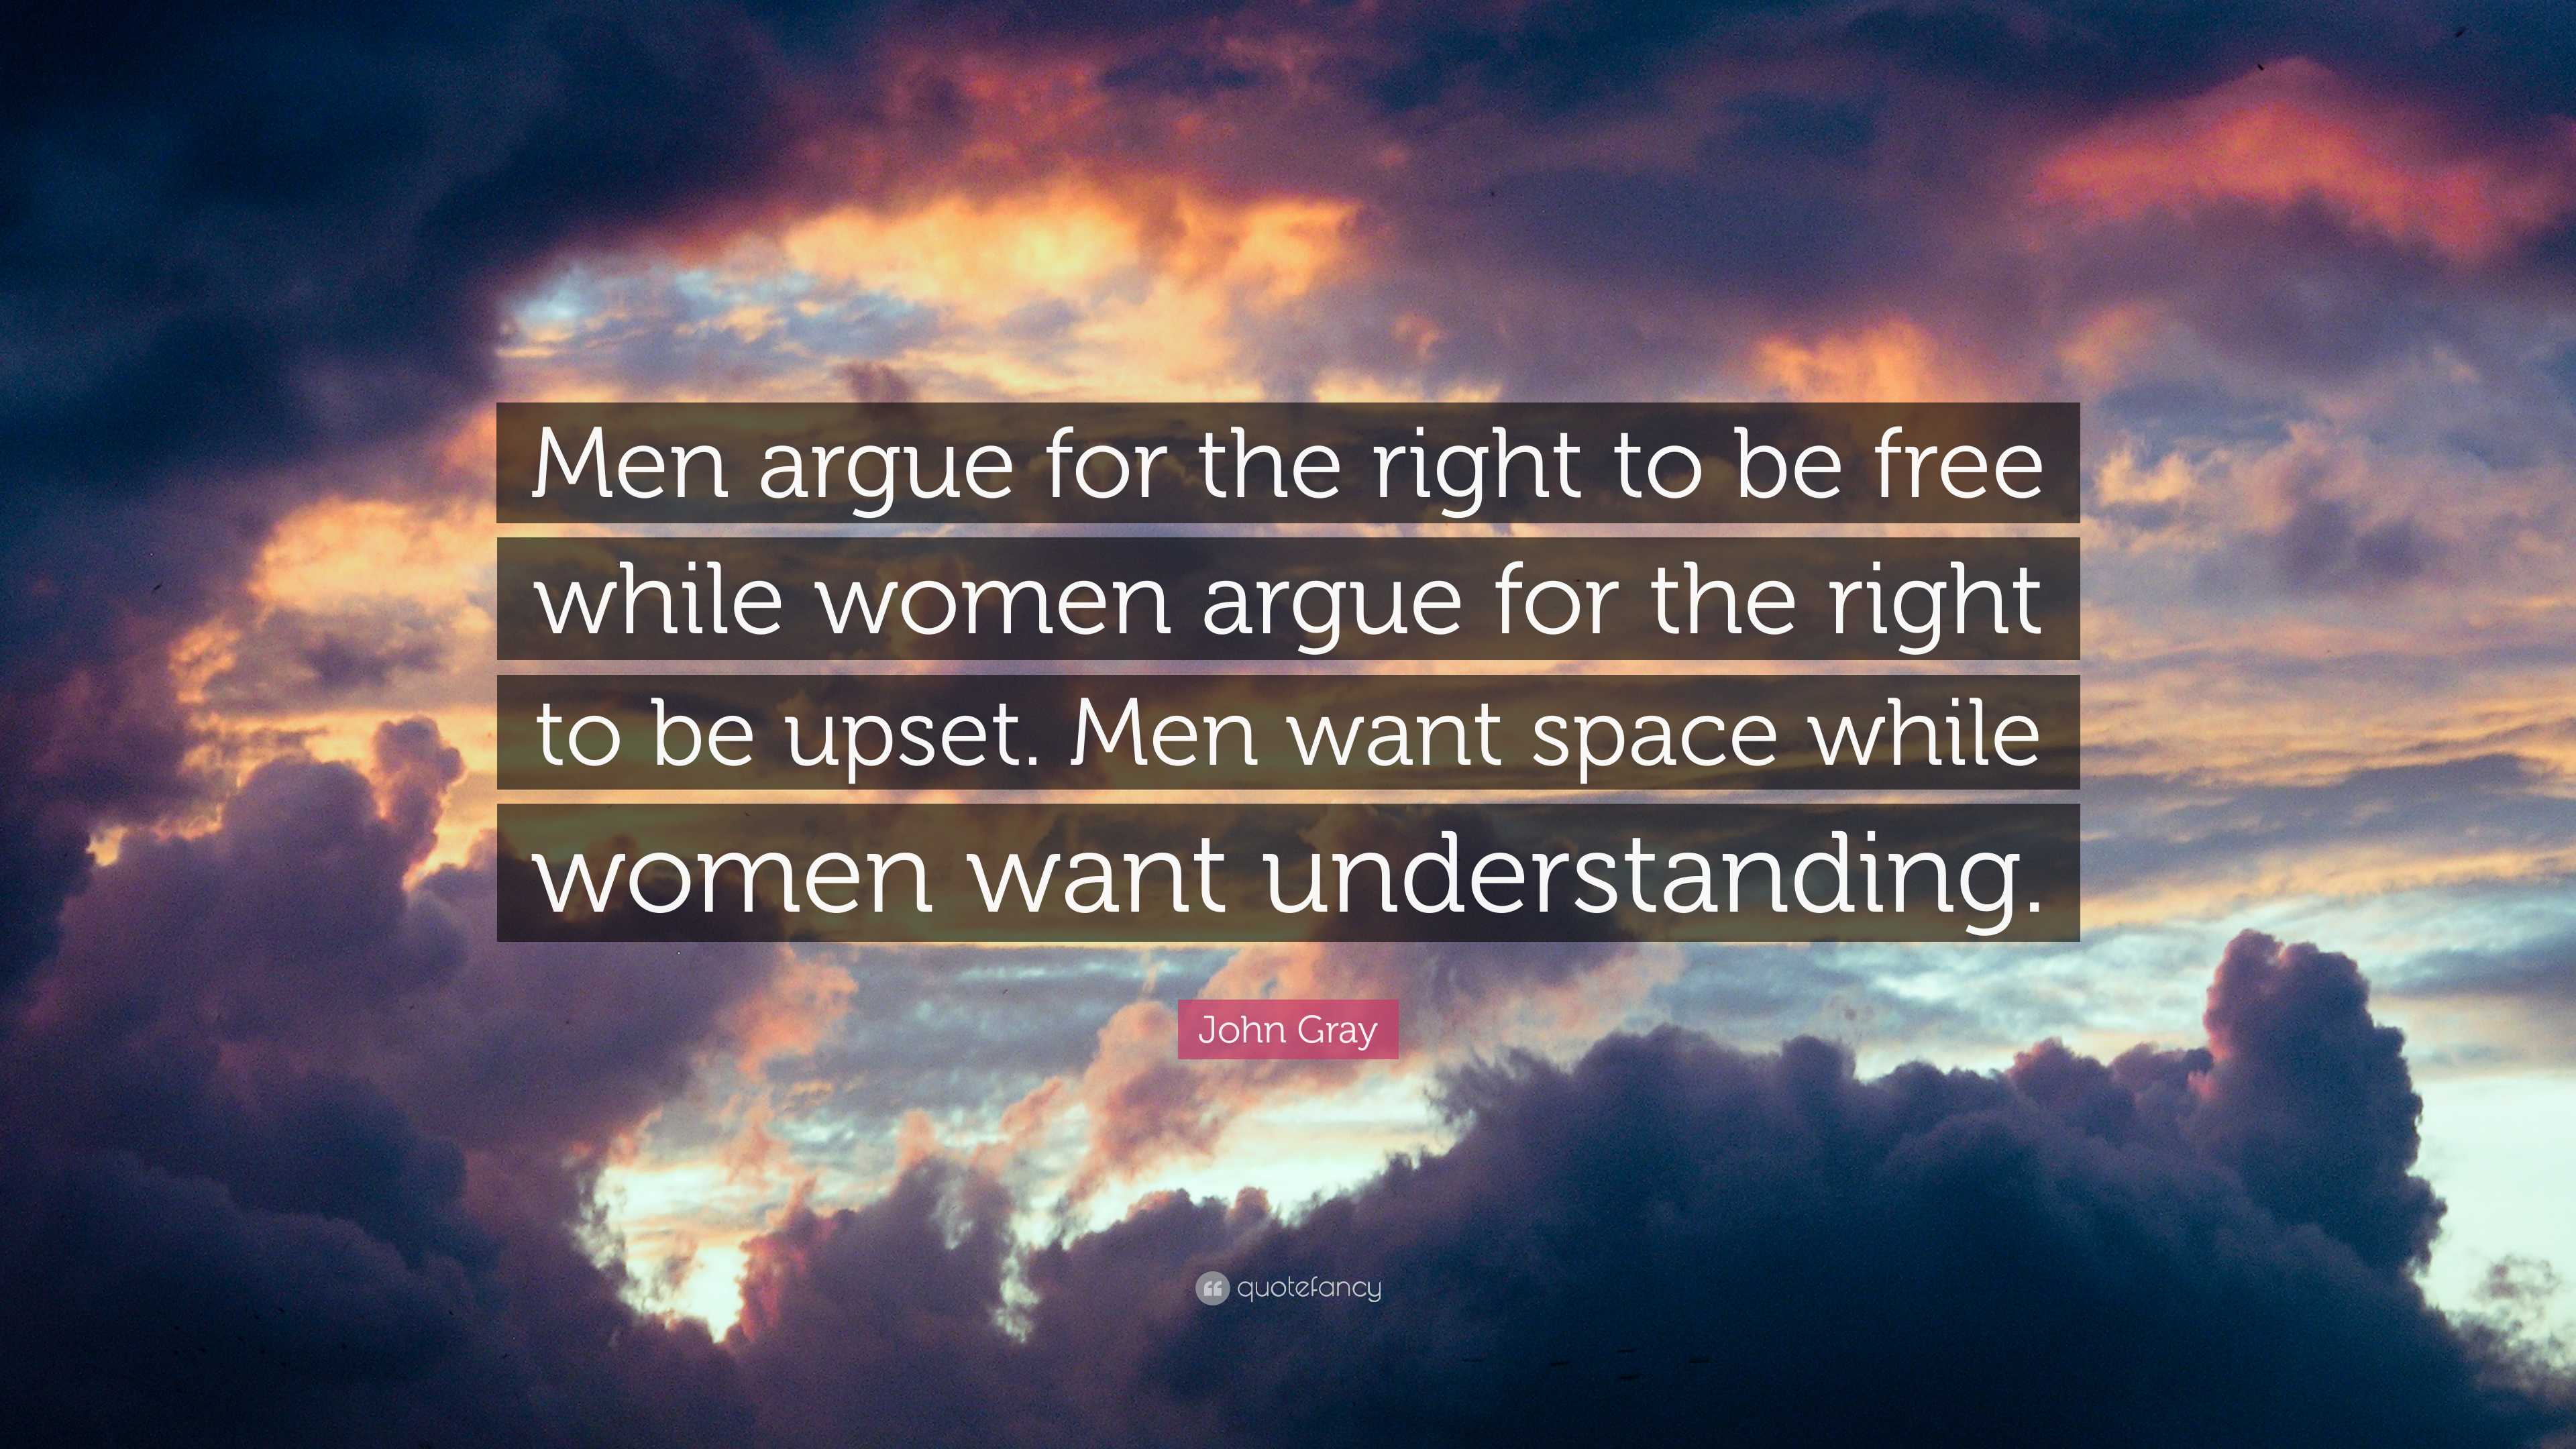 https://quotefancy.com/media/wallpaper/3840x2160/7837467-John-Gray-Quote-Men-argue-for-the-right-to-be-free-while-women.jpg